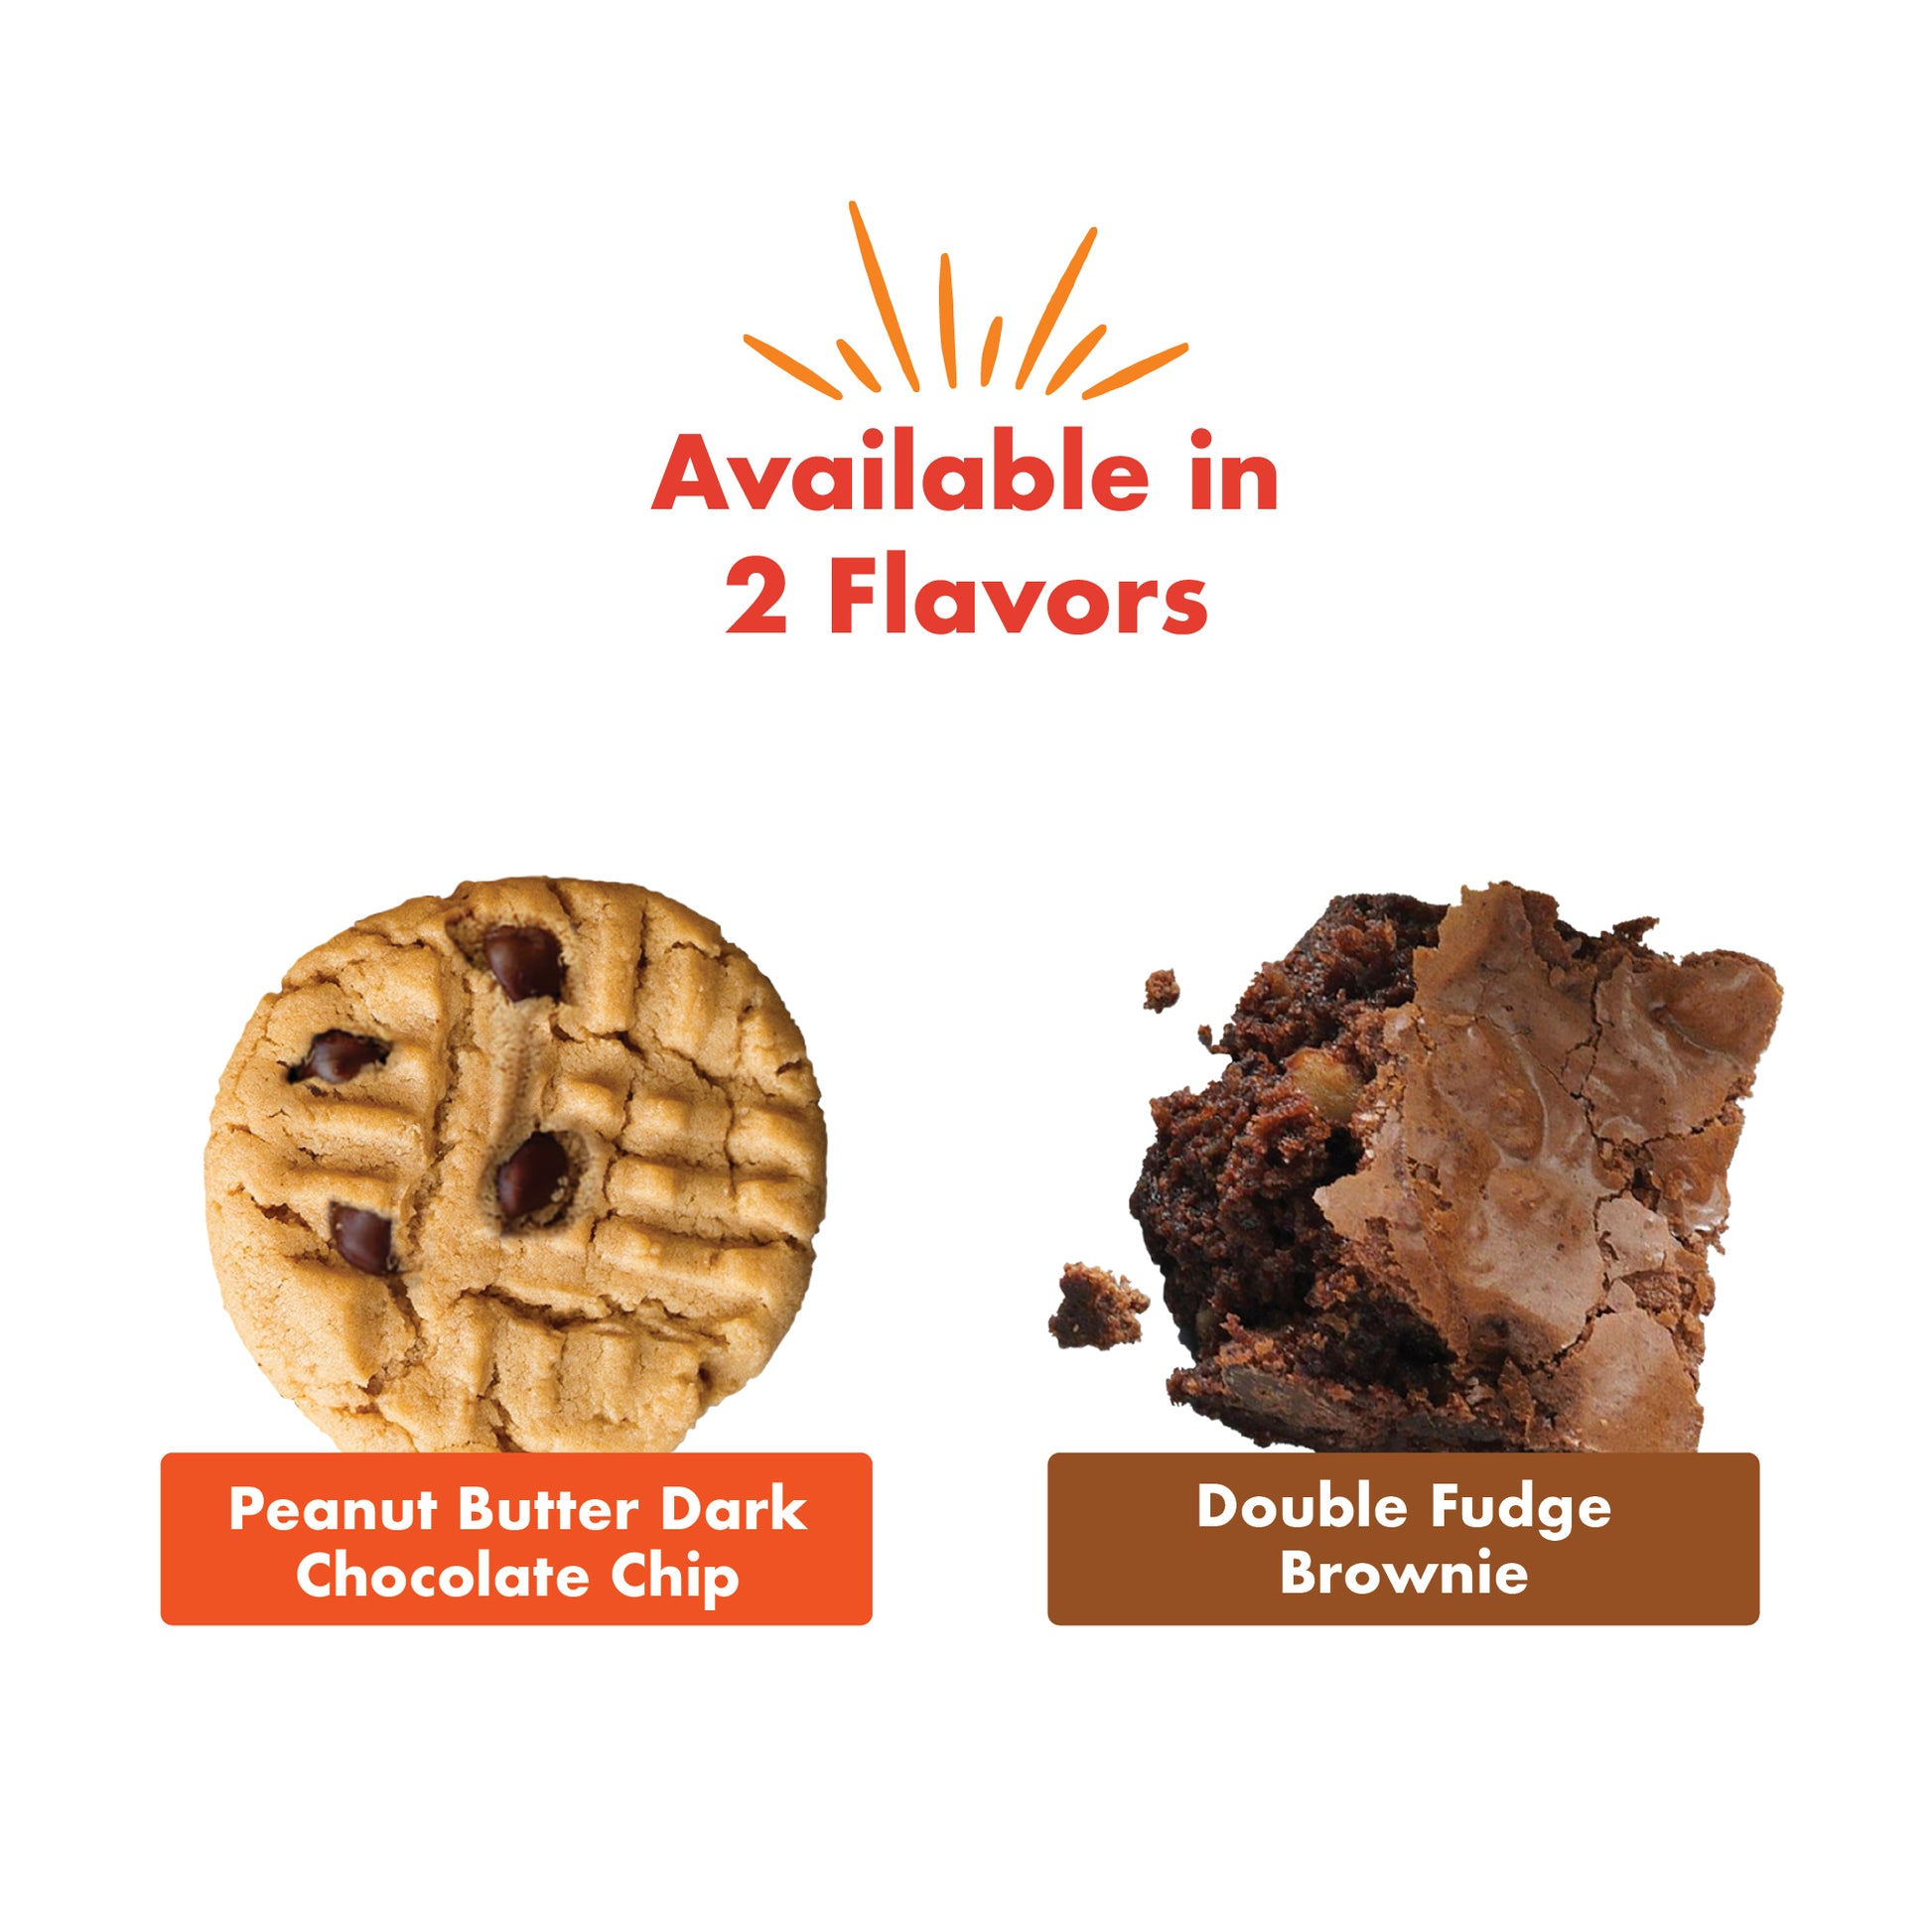 Collagen Protein Bars are available in 2 flavors: Peanut Butter Dark Chocolate Chip and Double Fudge Brownie.